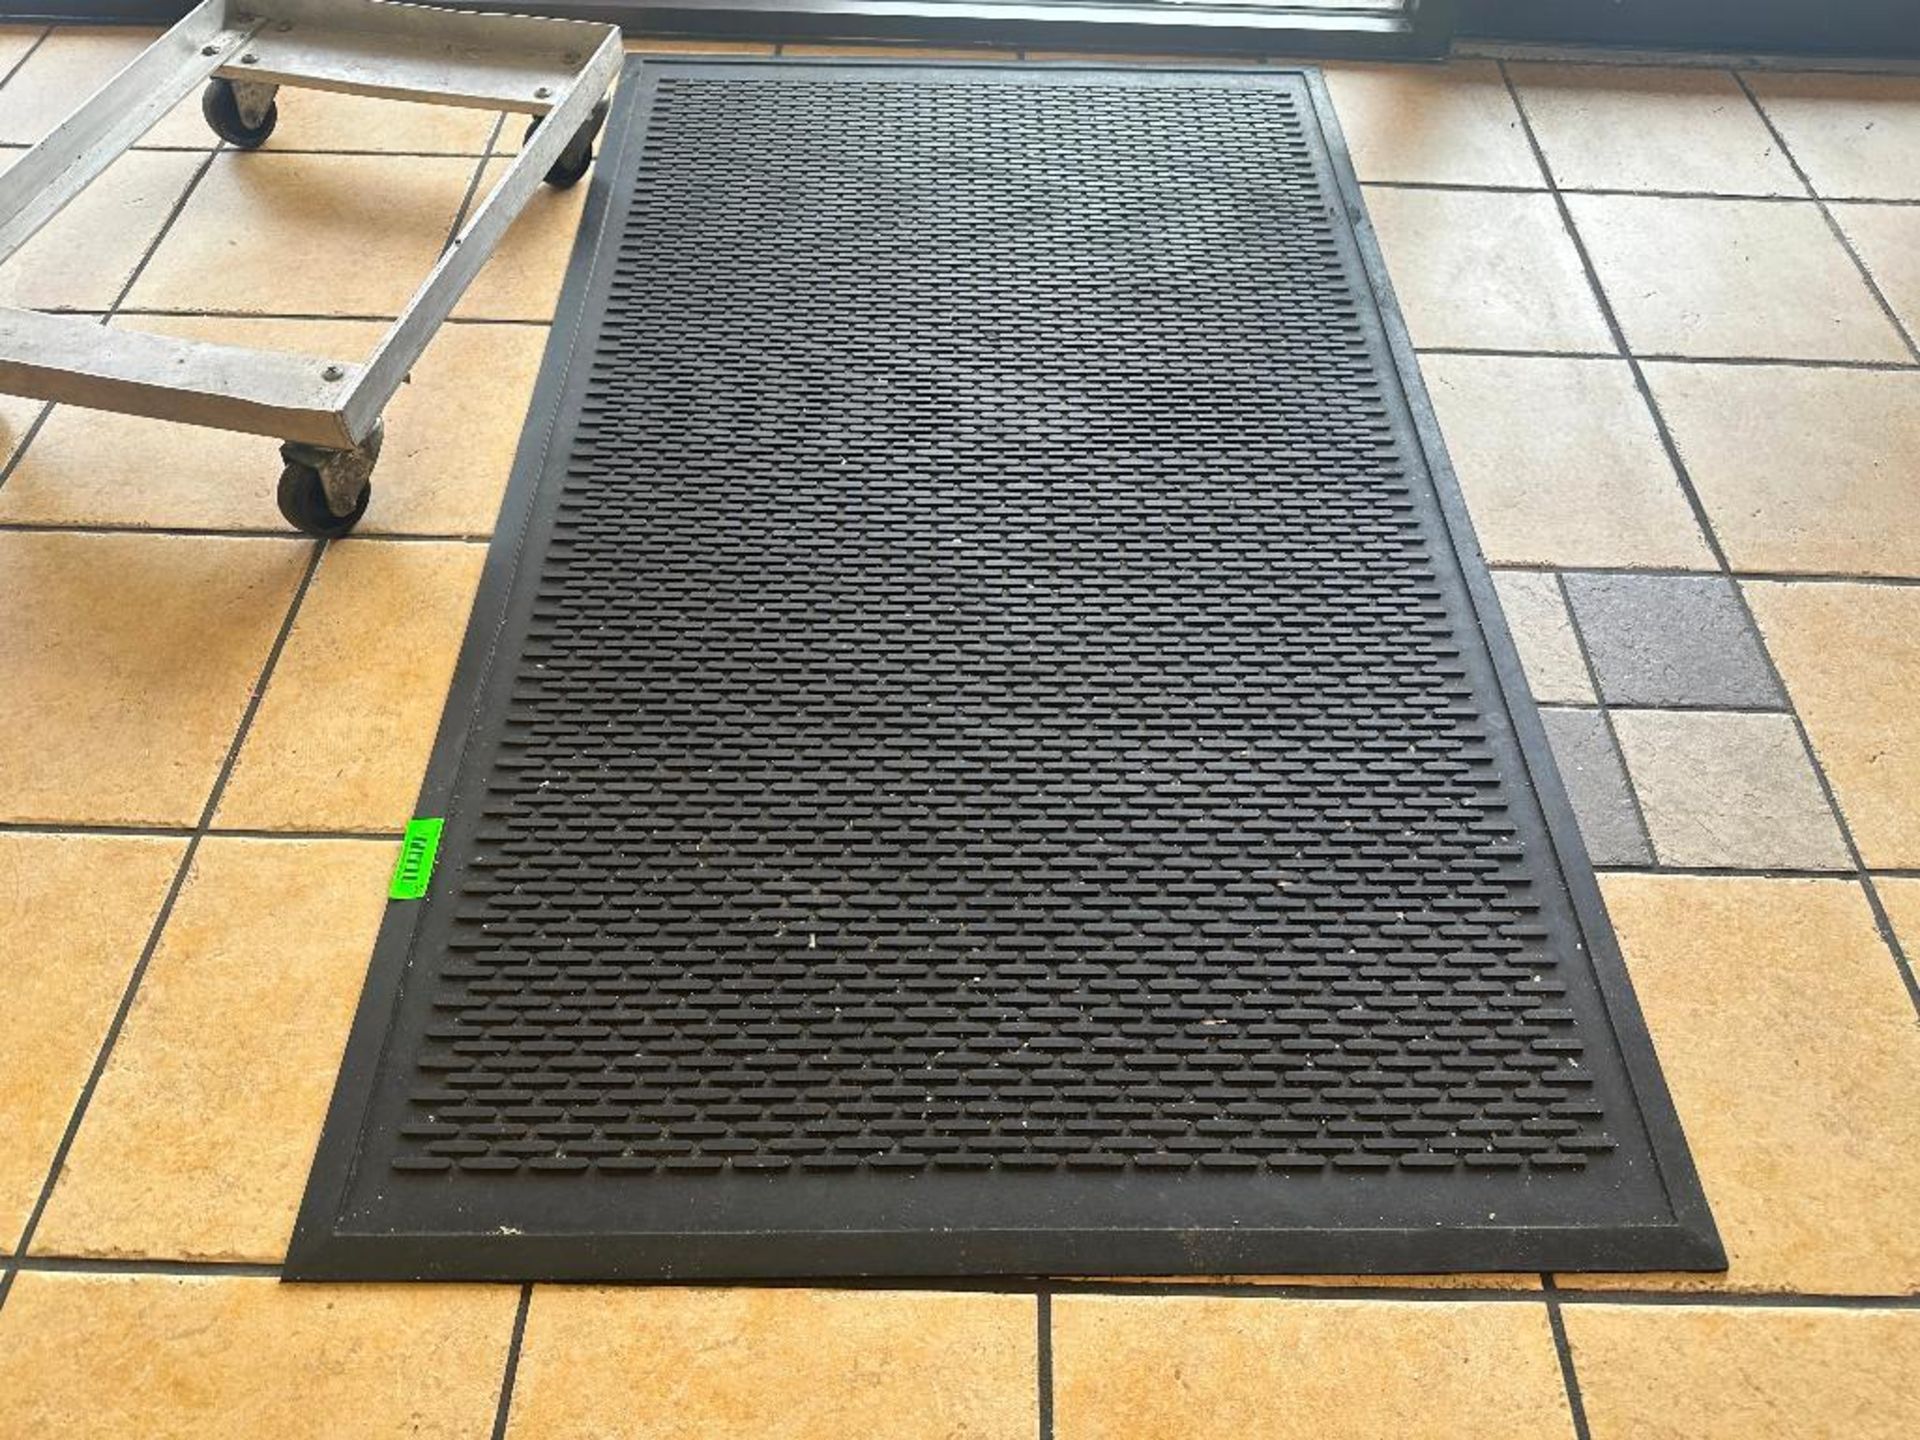 DESCRIPTION 5' X 3' HEAVY DUTY RUBBER TRAFFIC MAT. ADDITIONAL INFORMATION 6" DEEP THIS LOT IS: SOLD